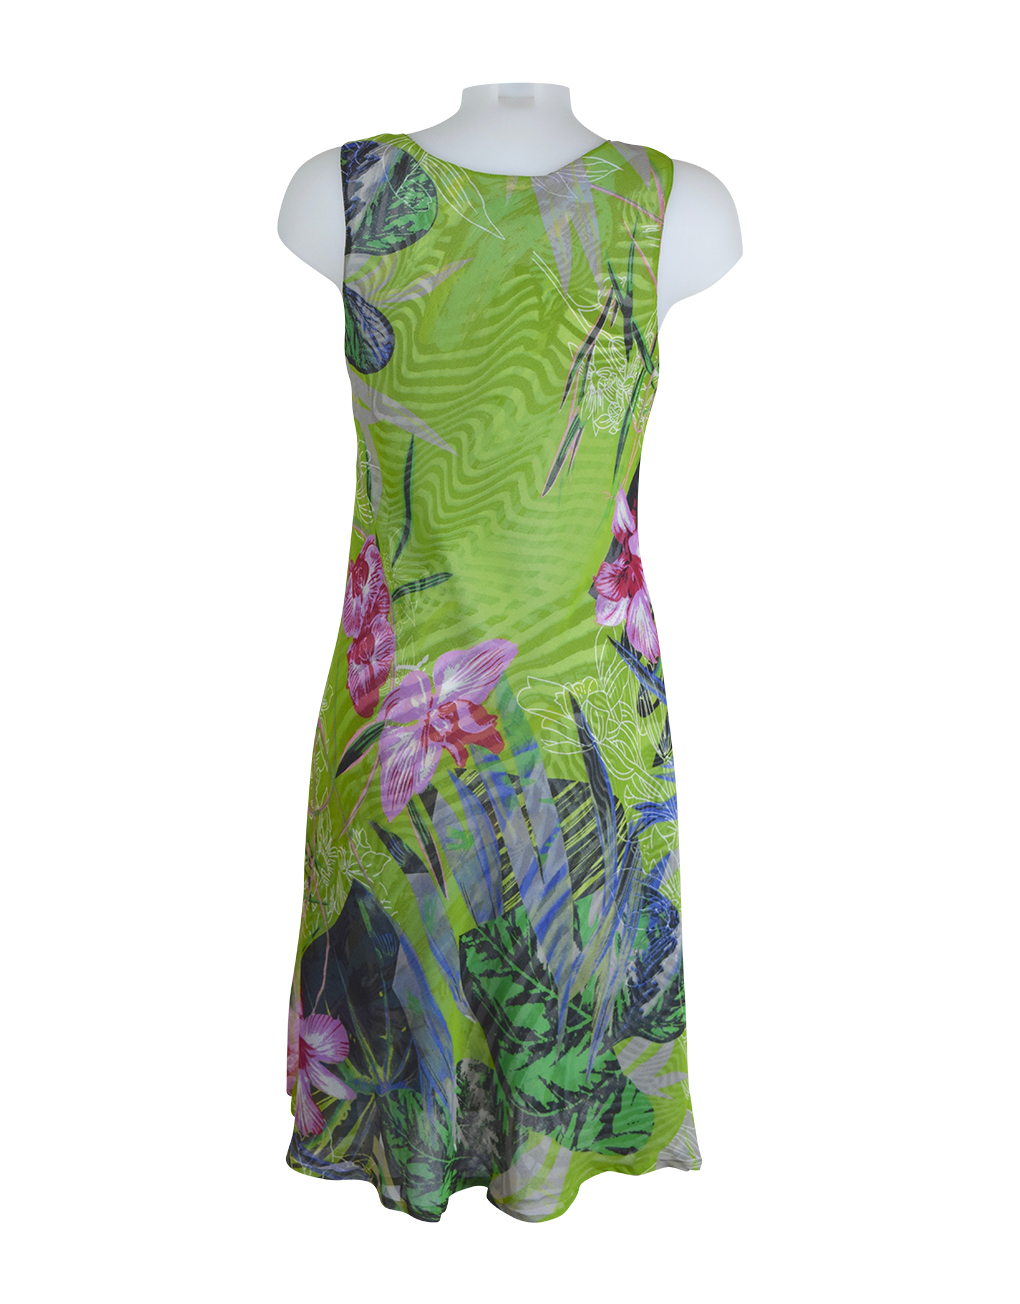 Paramour Reversible Dress Lime Green4